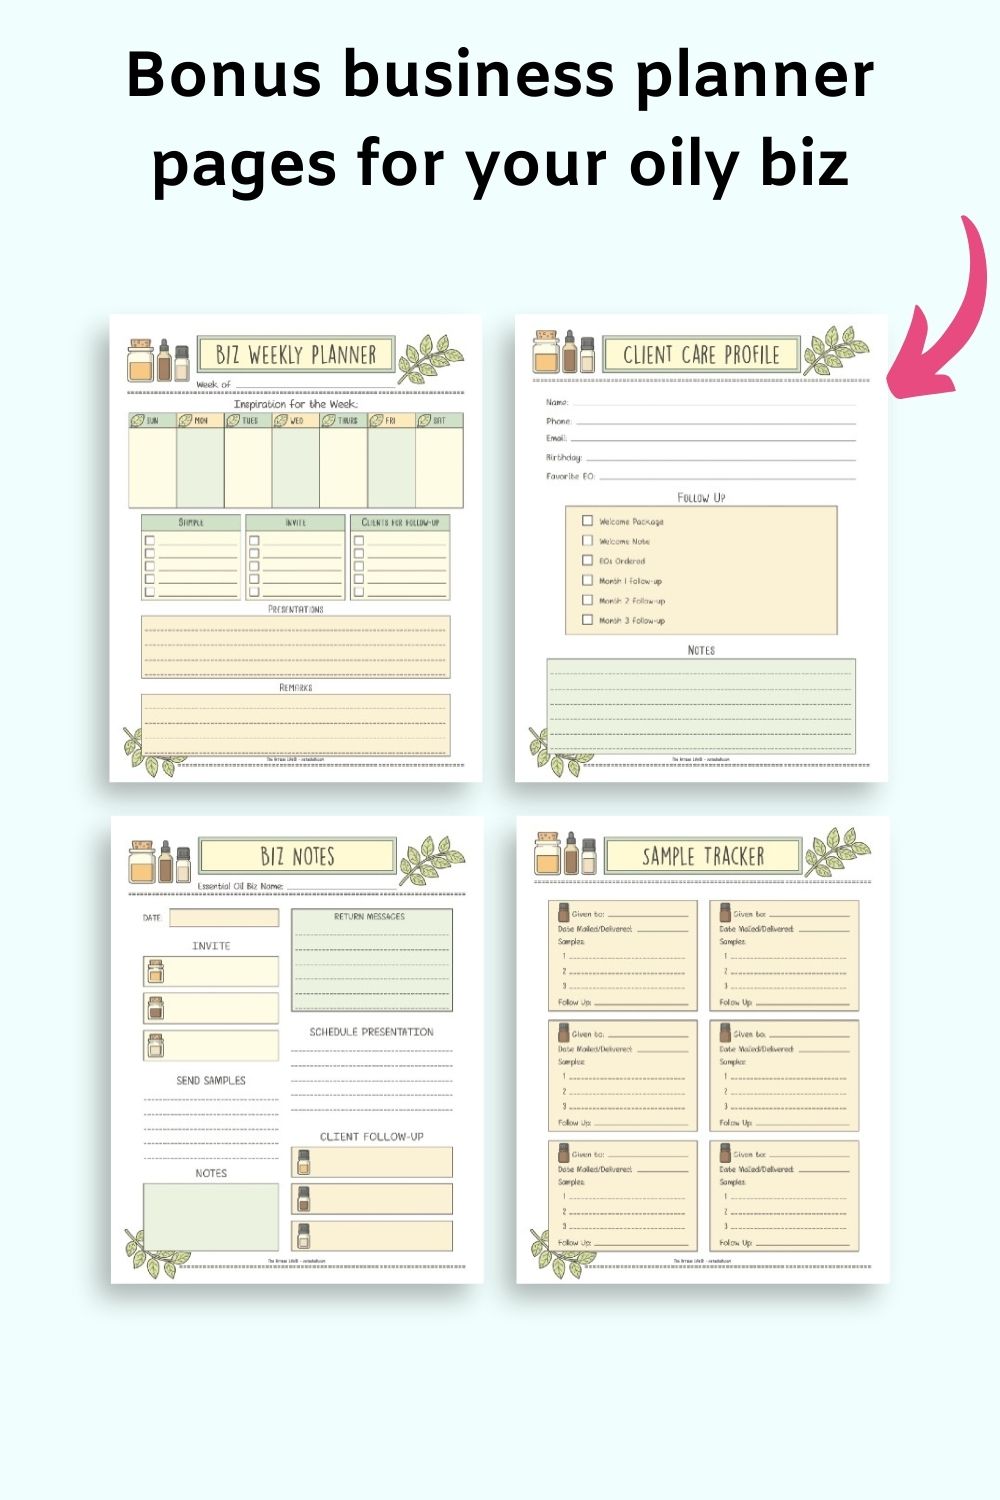 Text "bonus pages for planning your oily biz" with a weekly planner, client care profile, biz notes, and sample tracker pages